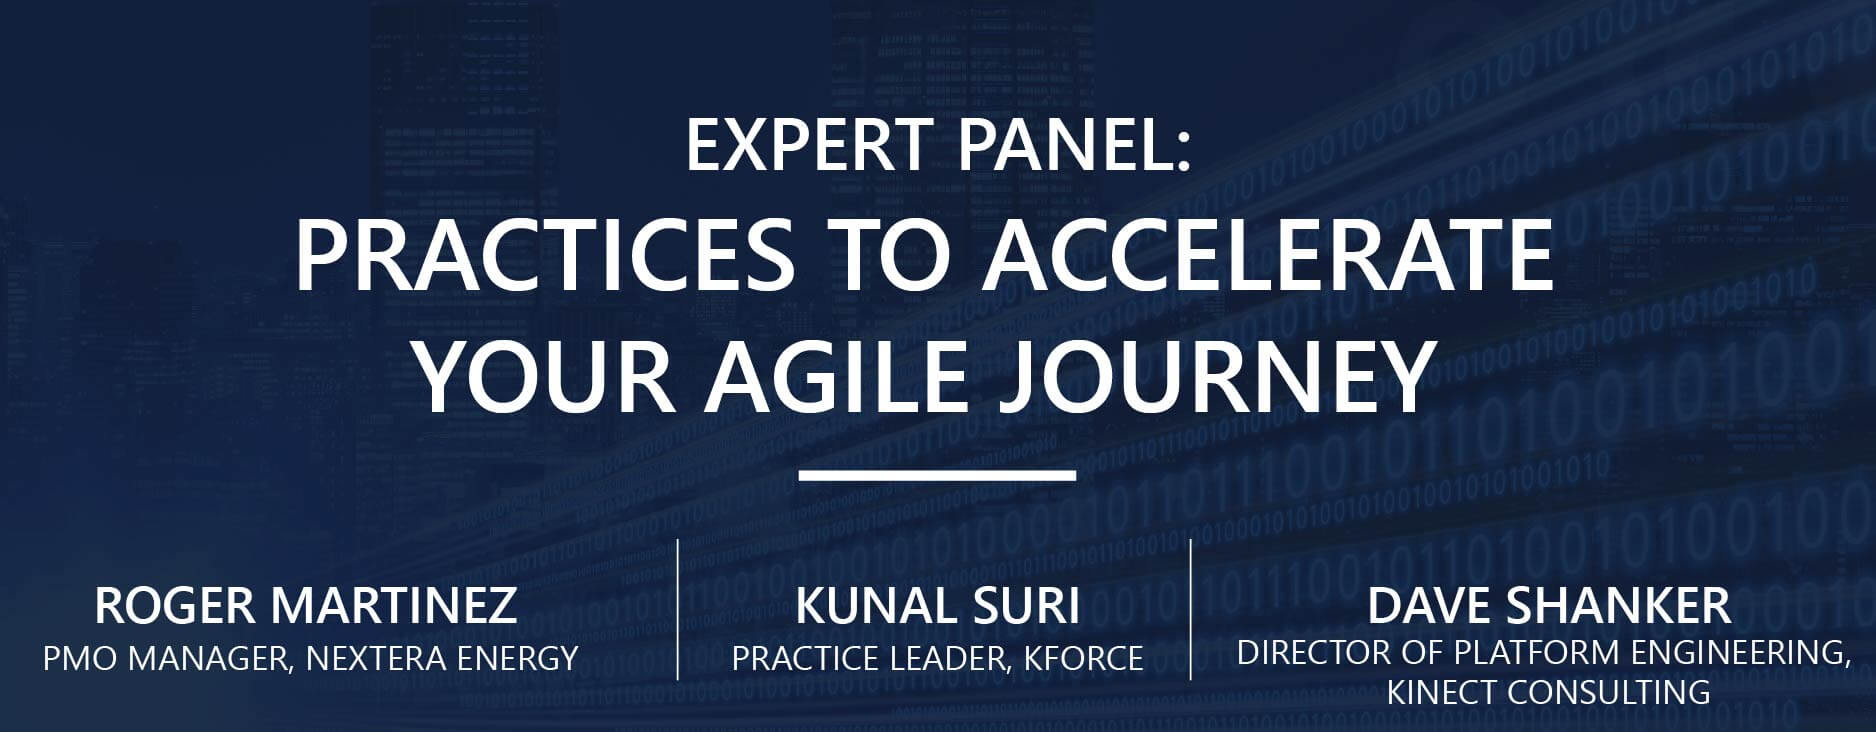 Expert Panel: Practices to Accelerate Your Agile Journey